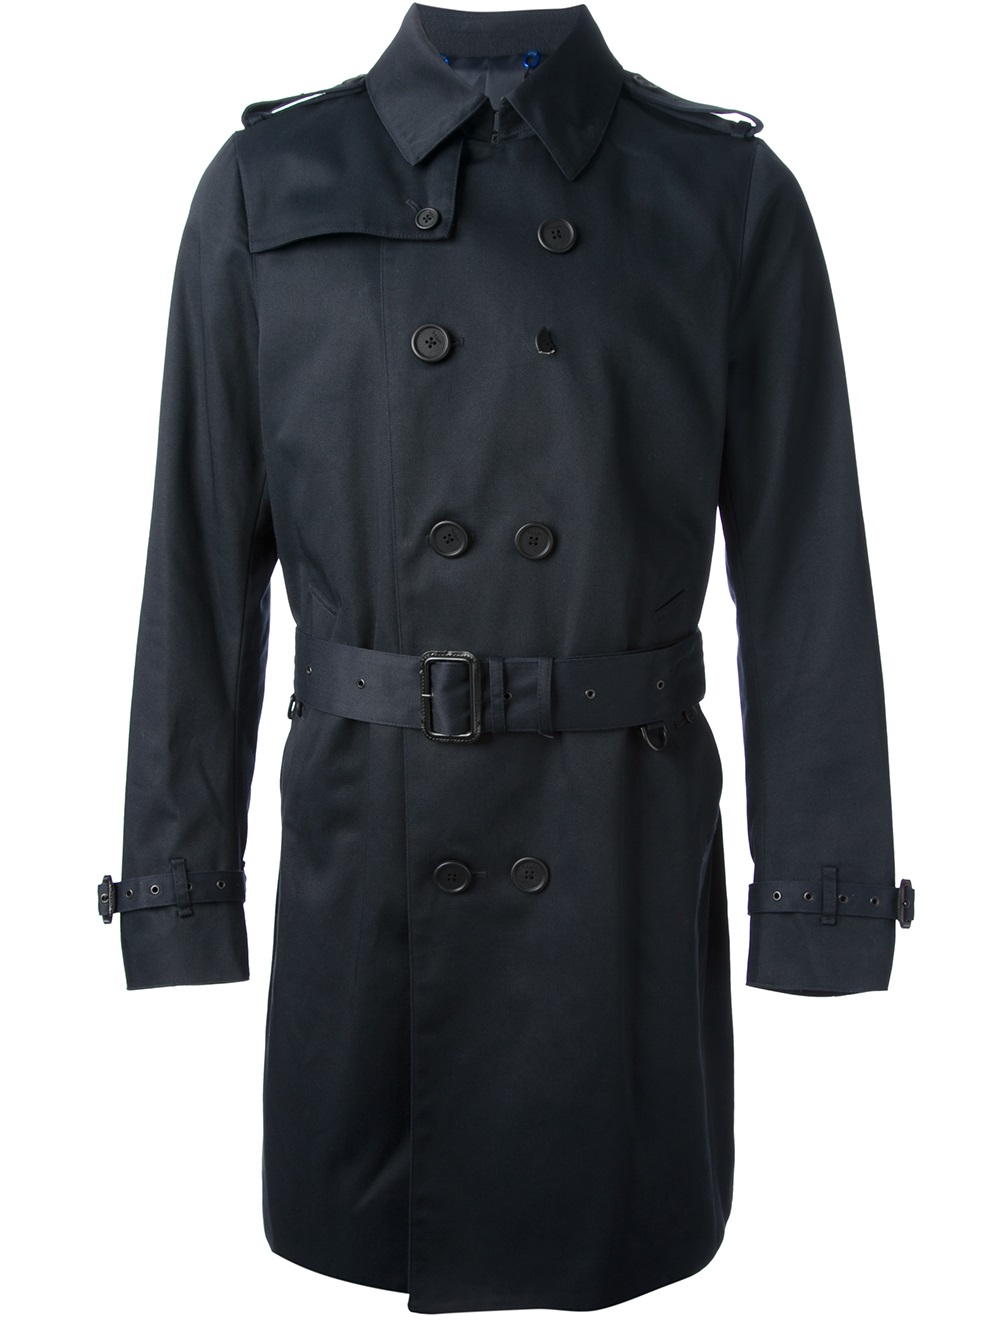 Lyst - Paul Smith Trench Coat in Blue for Men